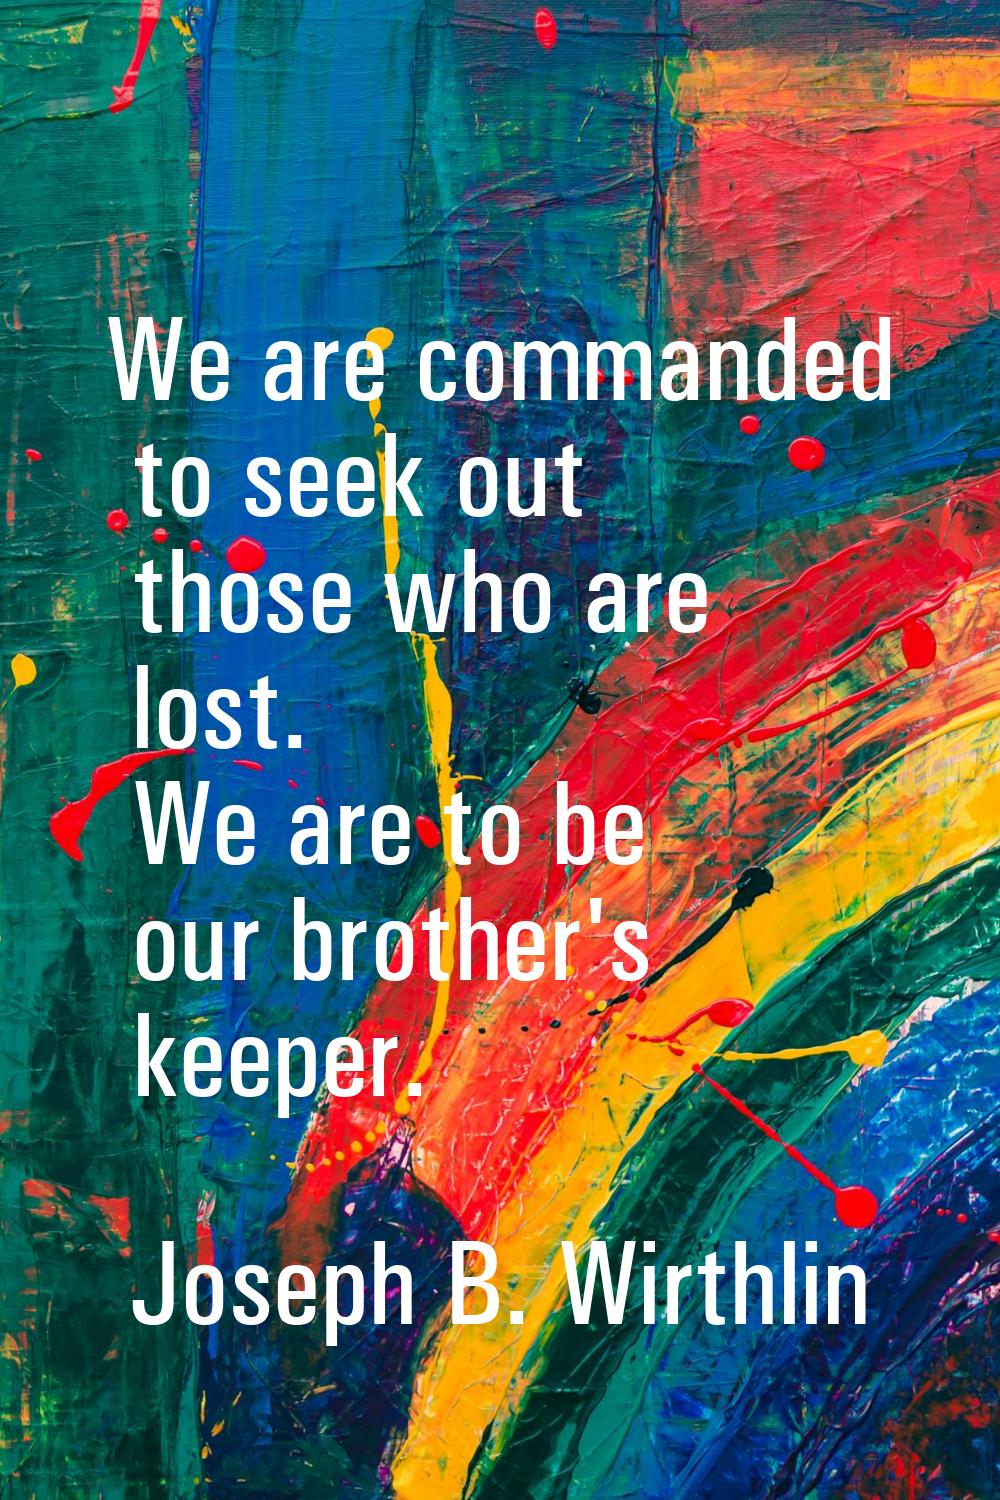 We are commanded to seek out those who are lost. We are to be our brother's keeper.